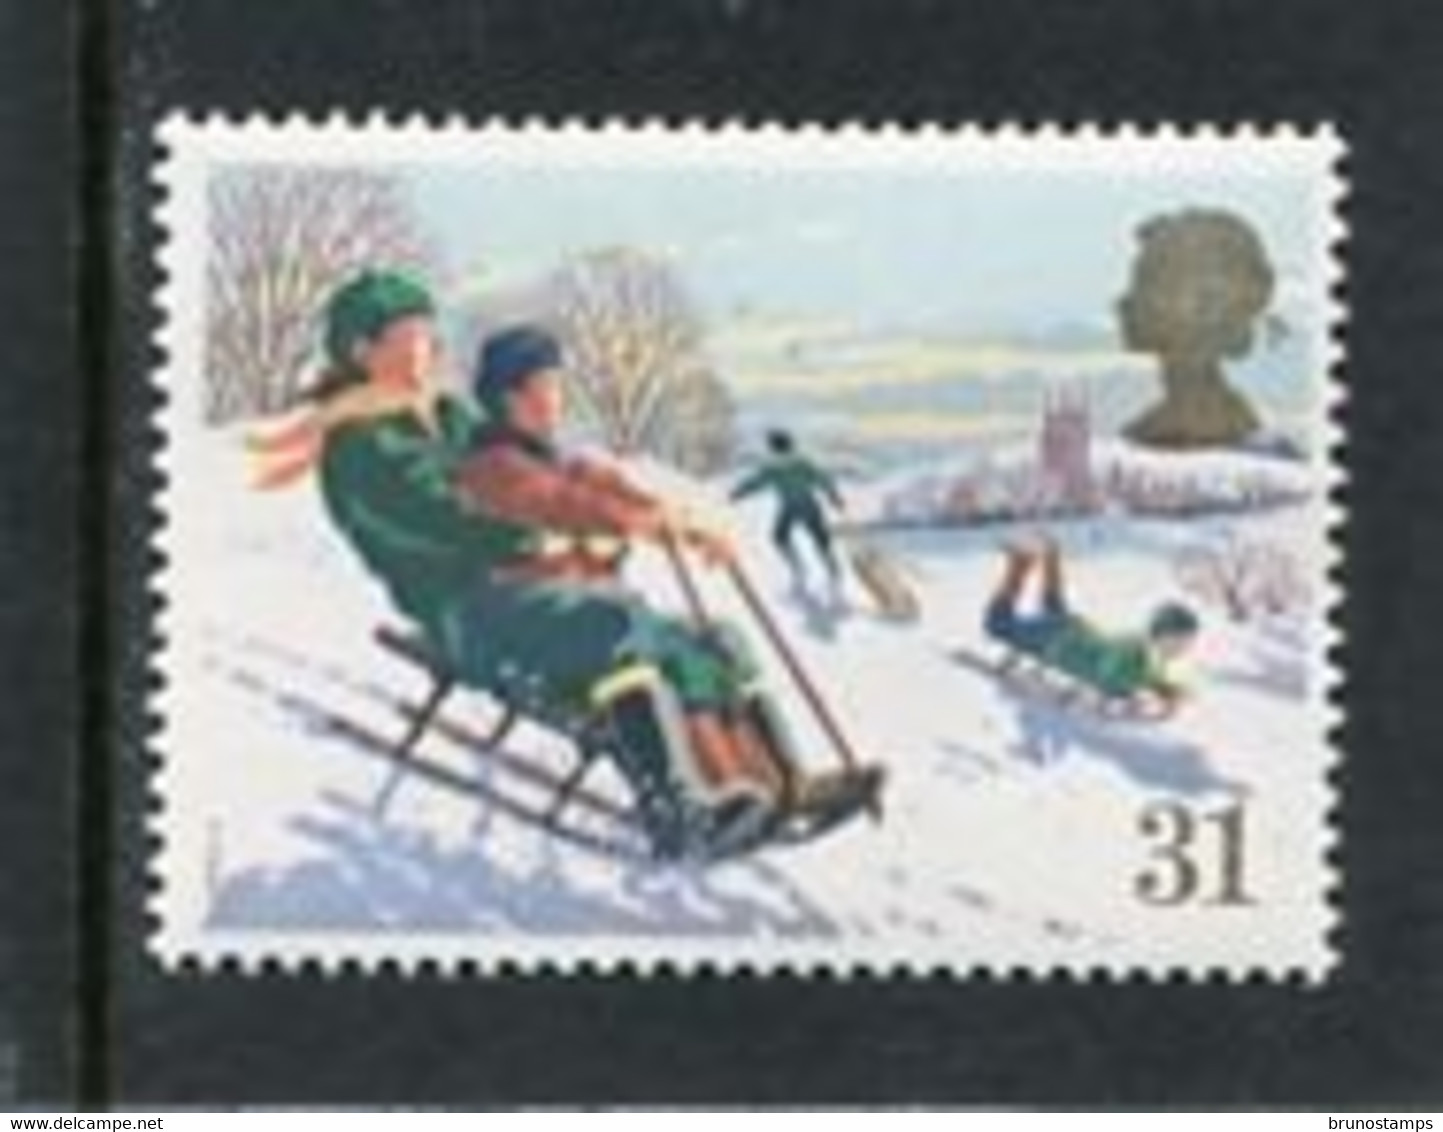 GREAT BRITAIN - 1990  31p  CHRISTMAS  MINT NH - Unclassified